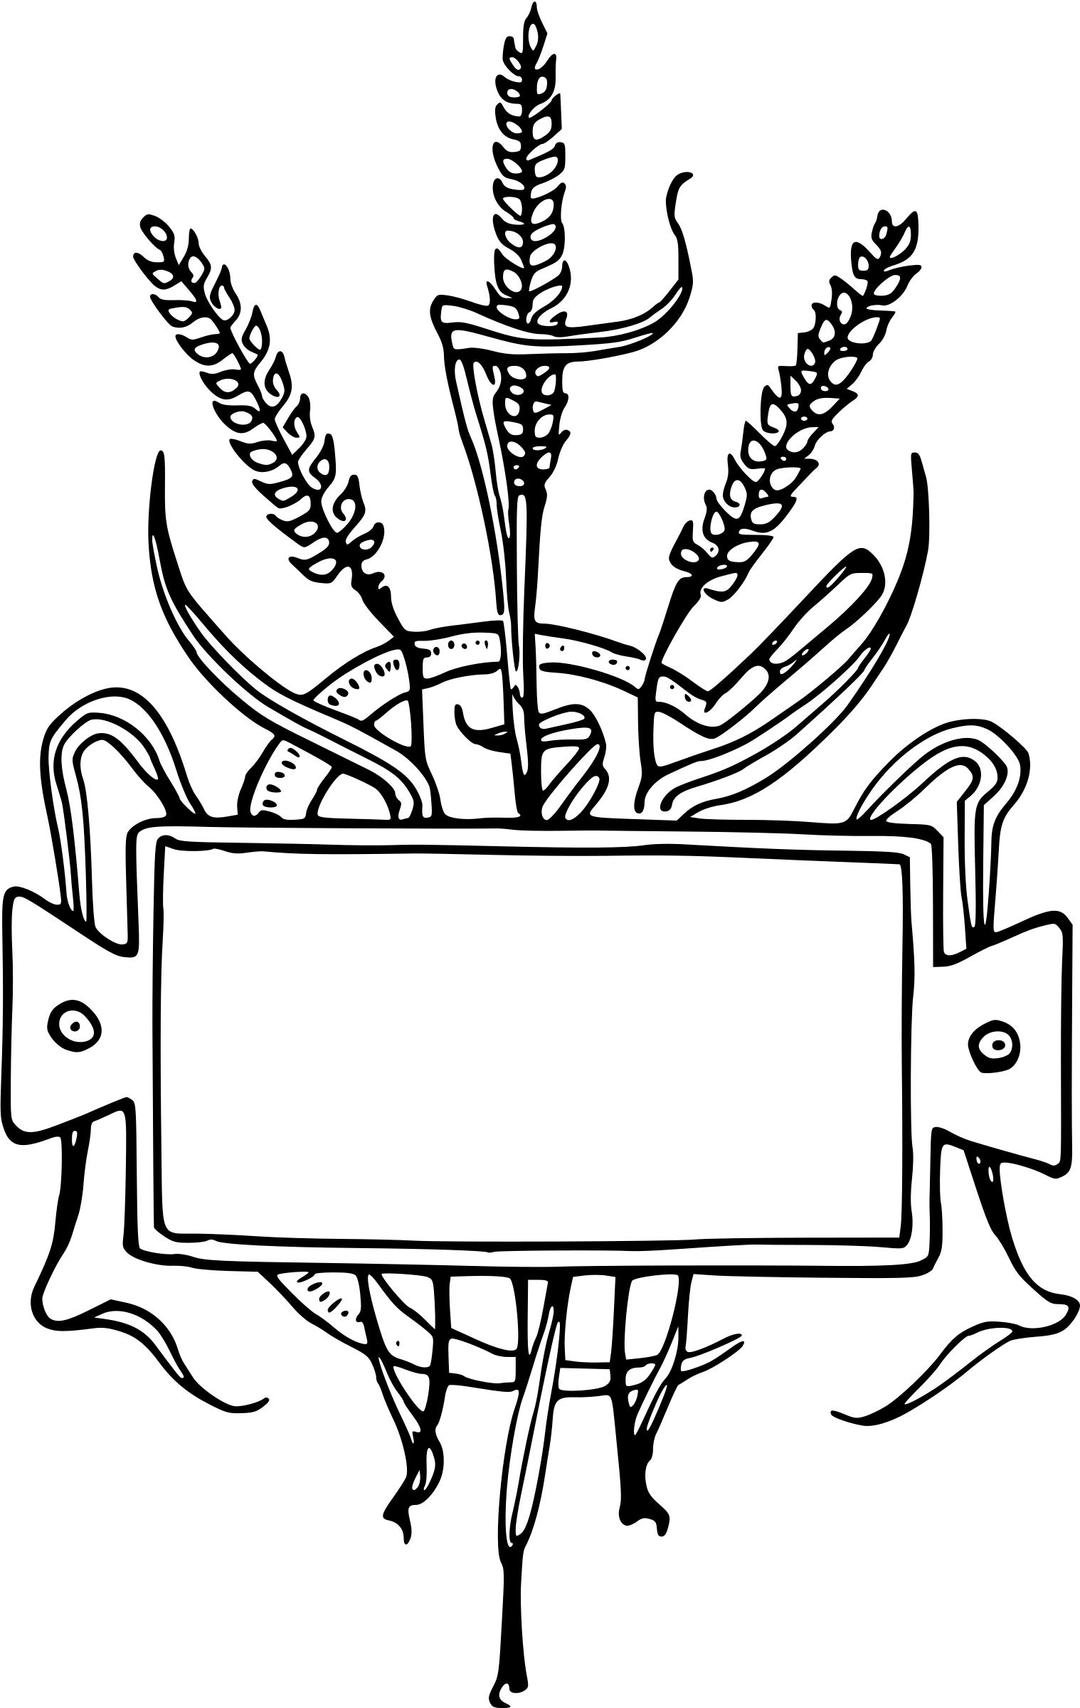 Wheat Frame png transparent